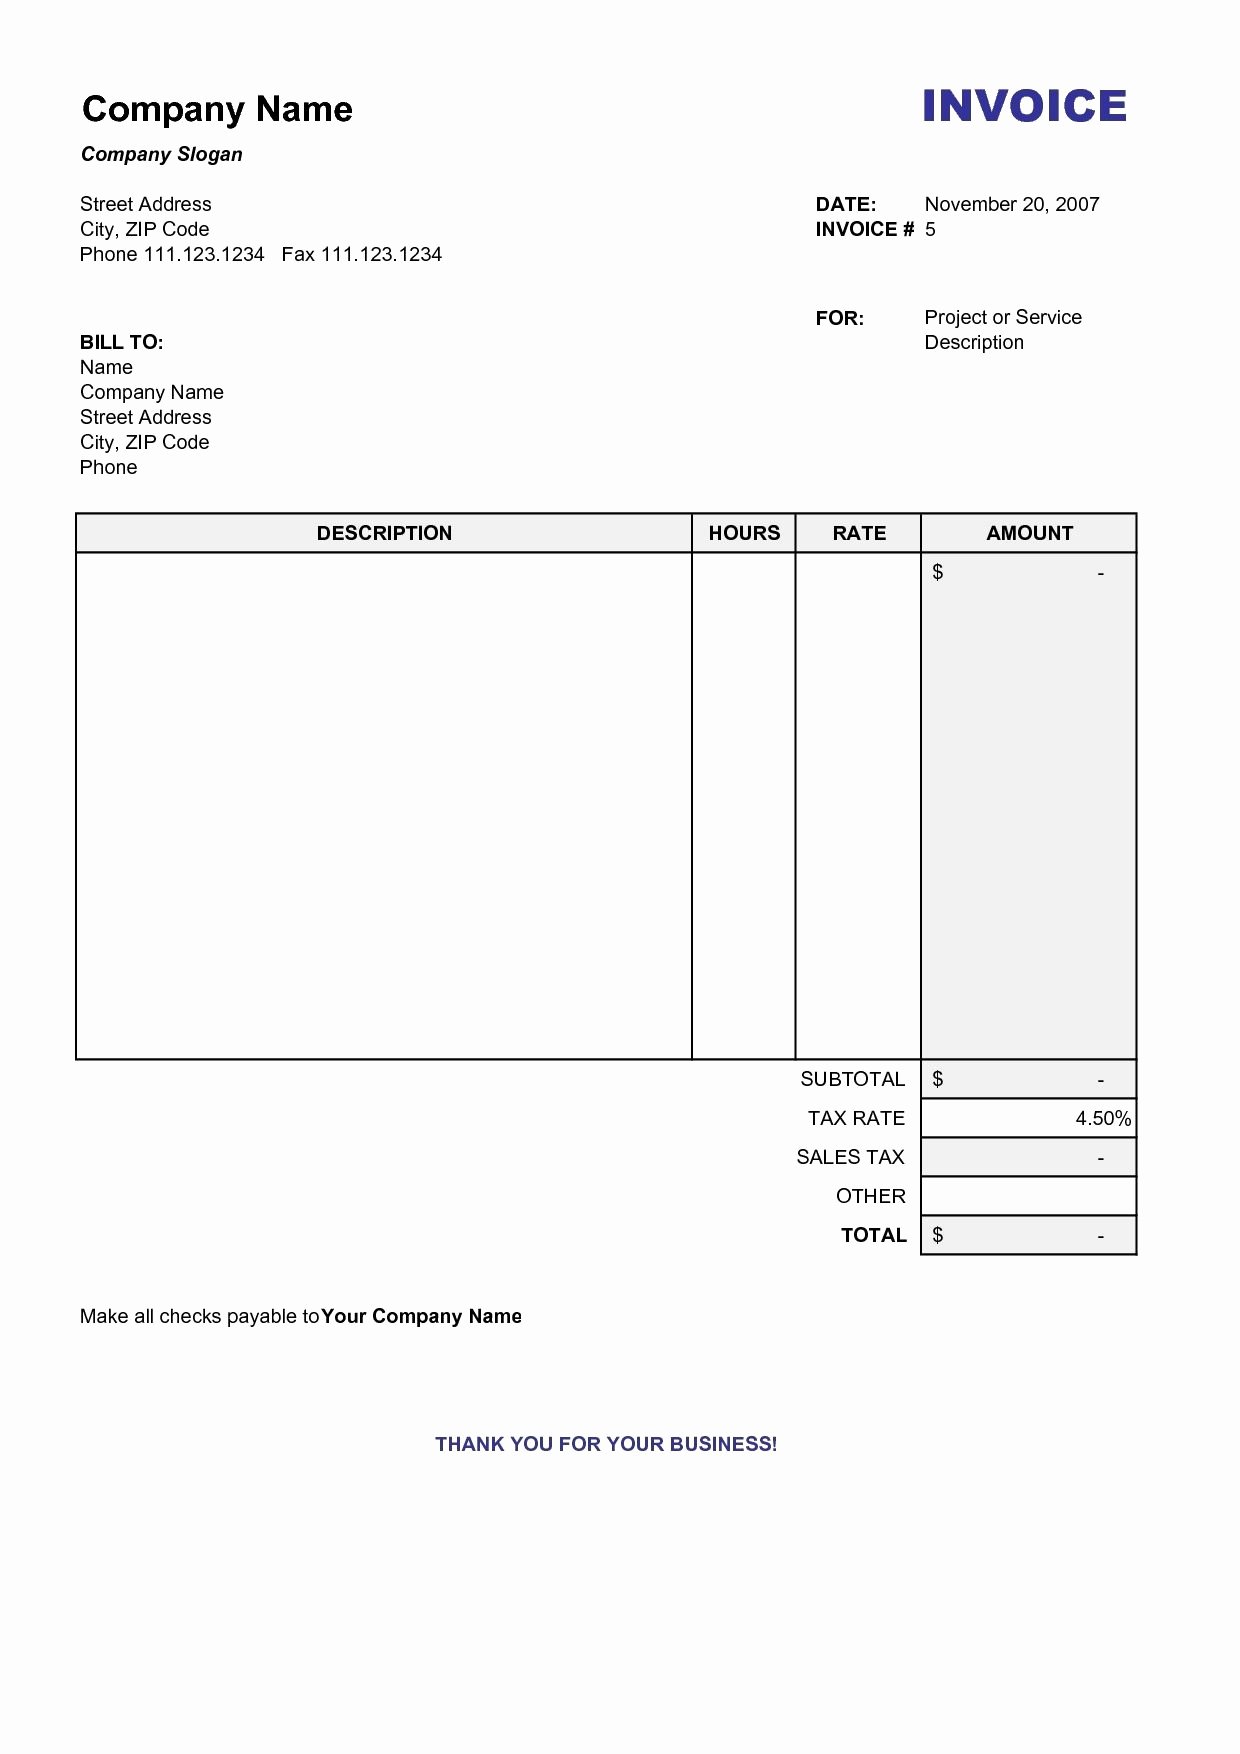 Free Invoice Receipt Template Awesome Copy Of A Blank Invoice Invoice Template Free 2016 Copy Of